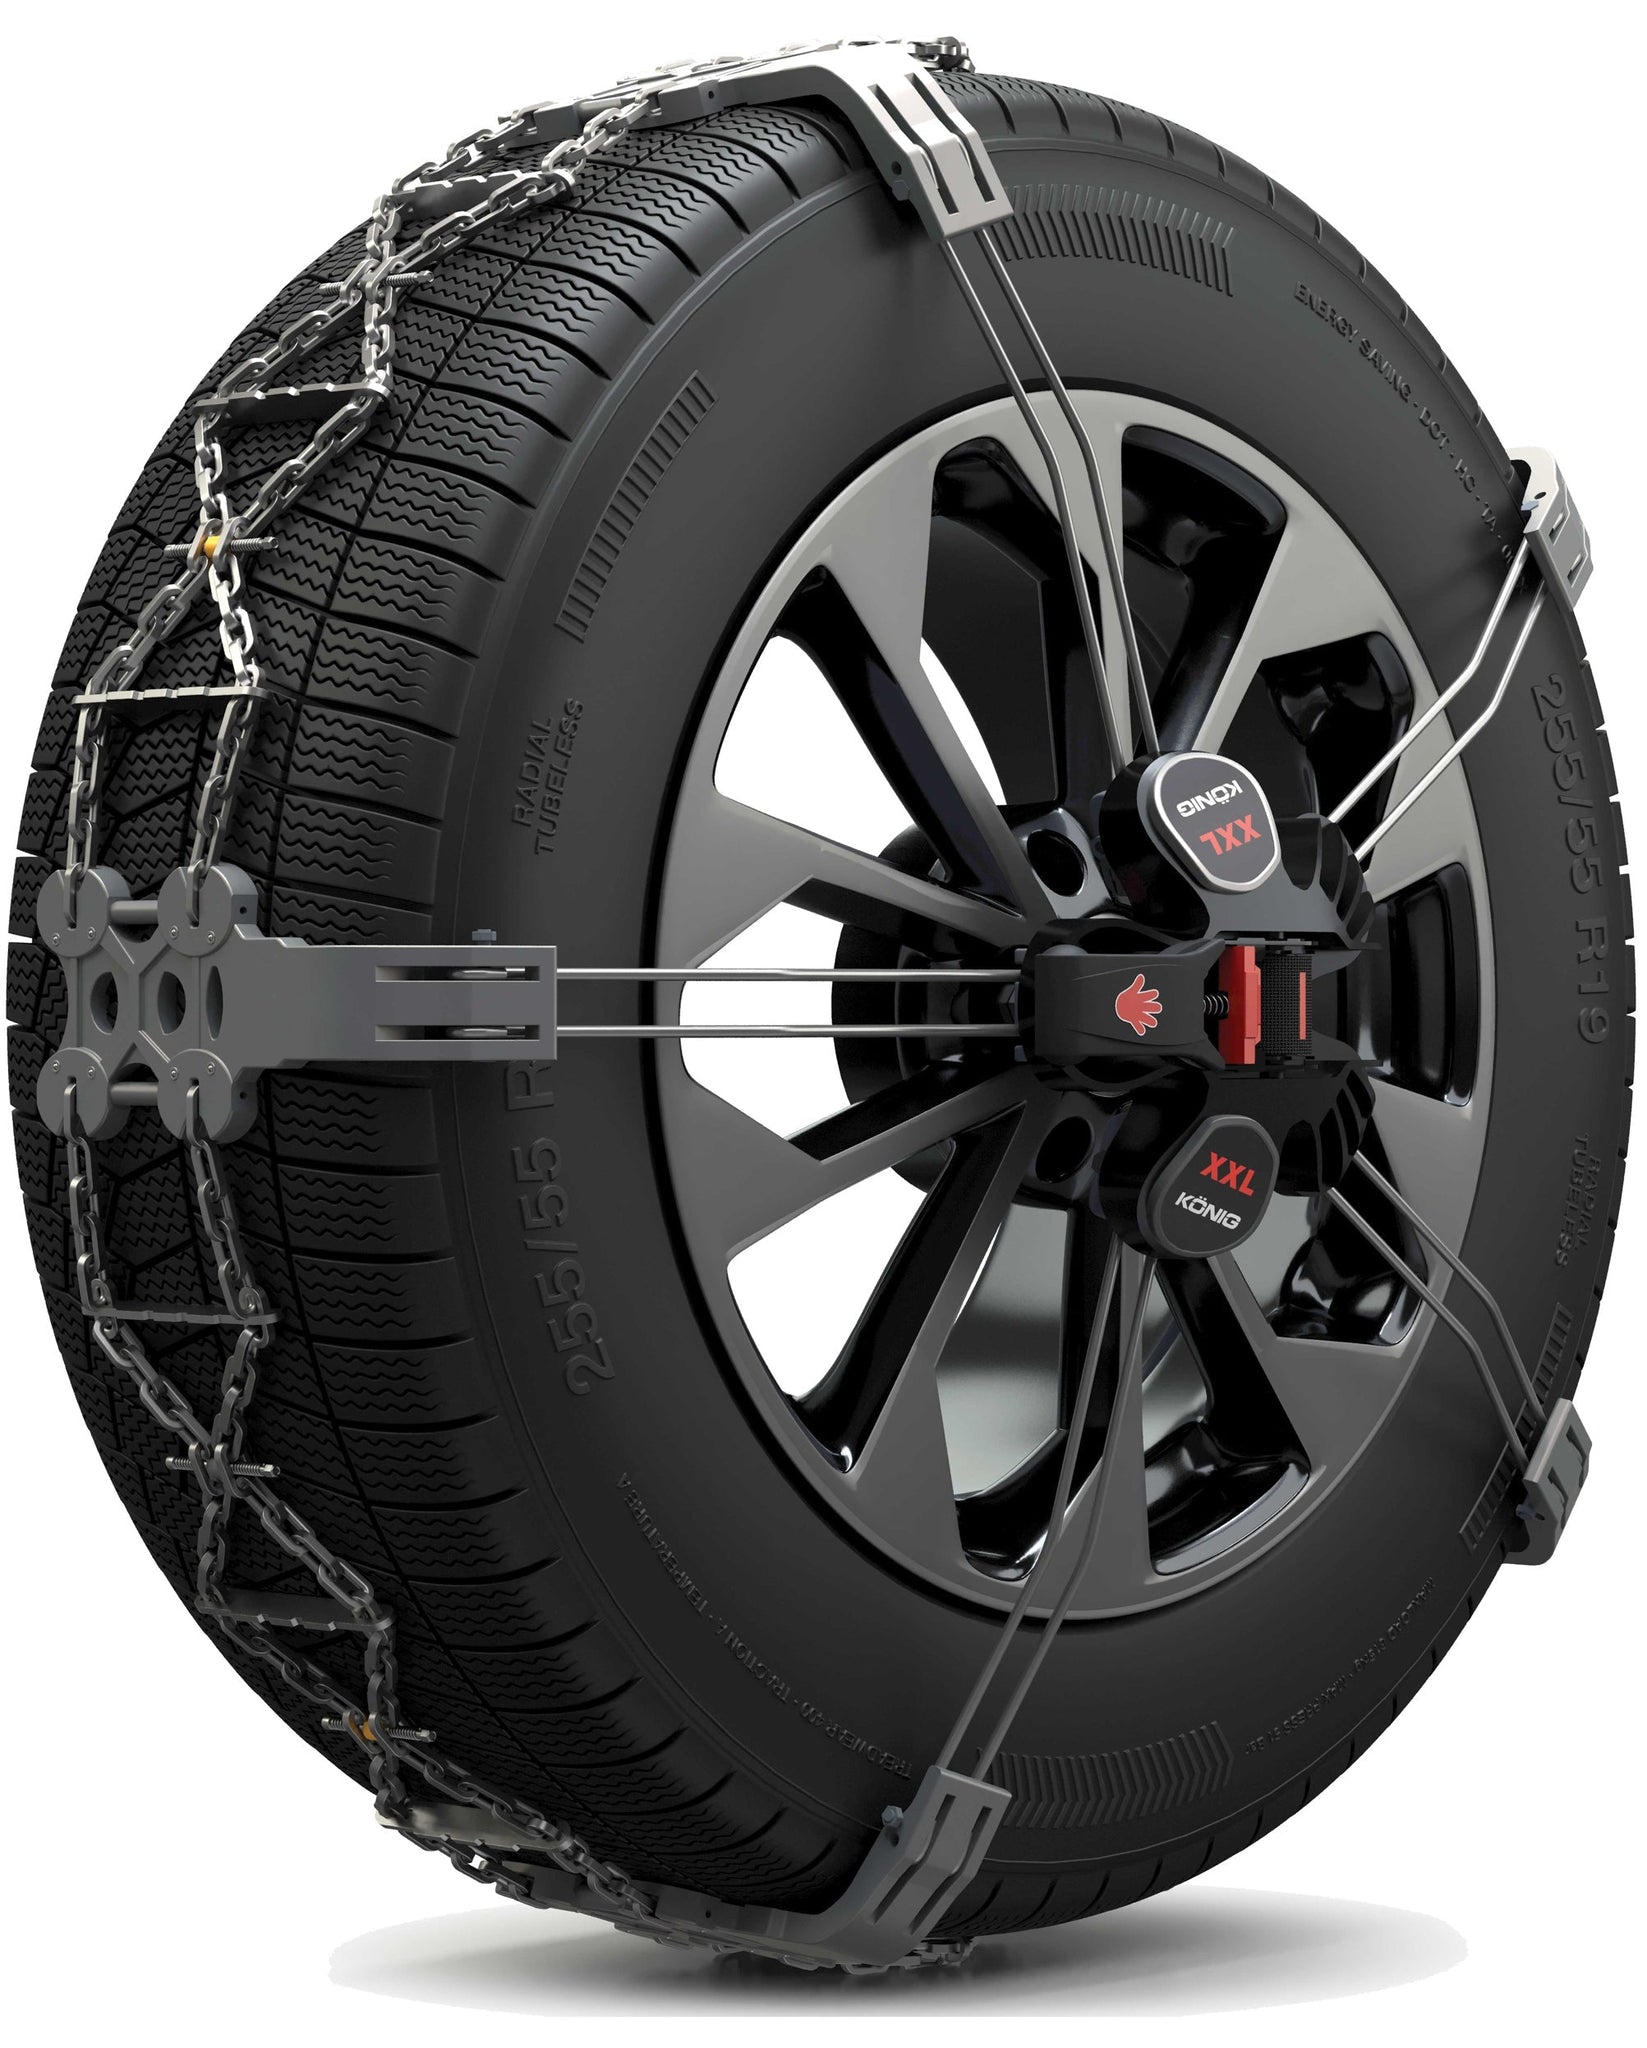 Snow chains for the Tesla Model Y